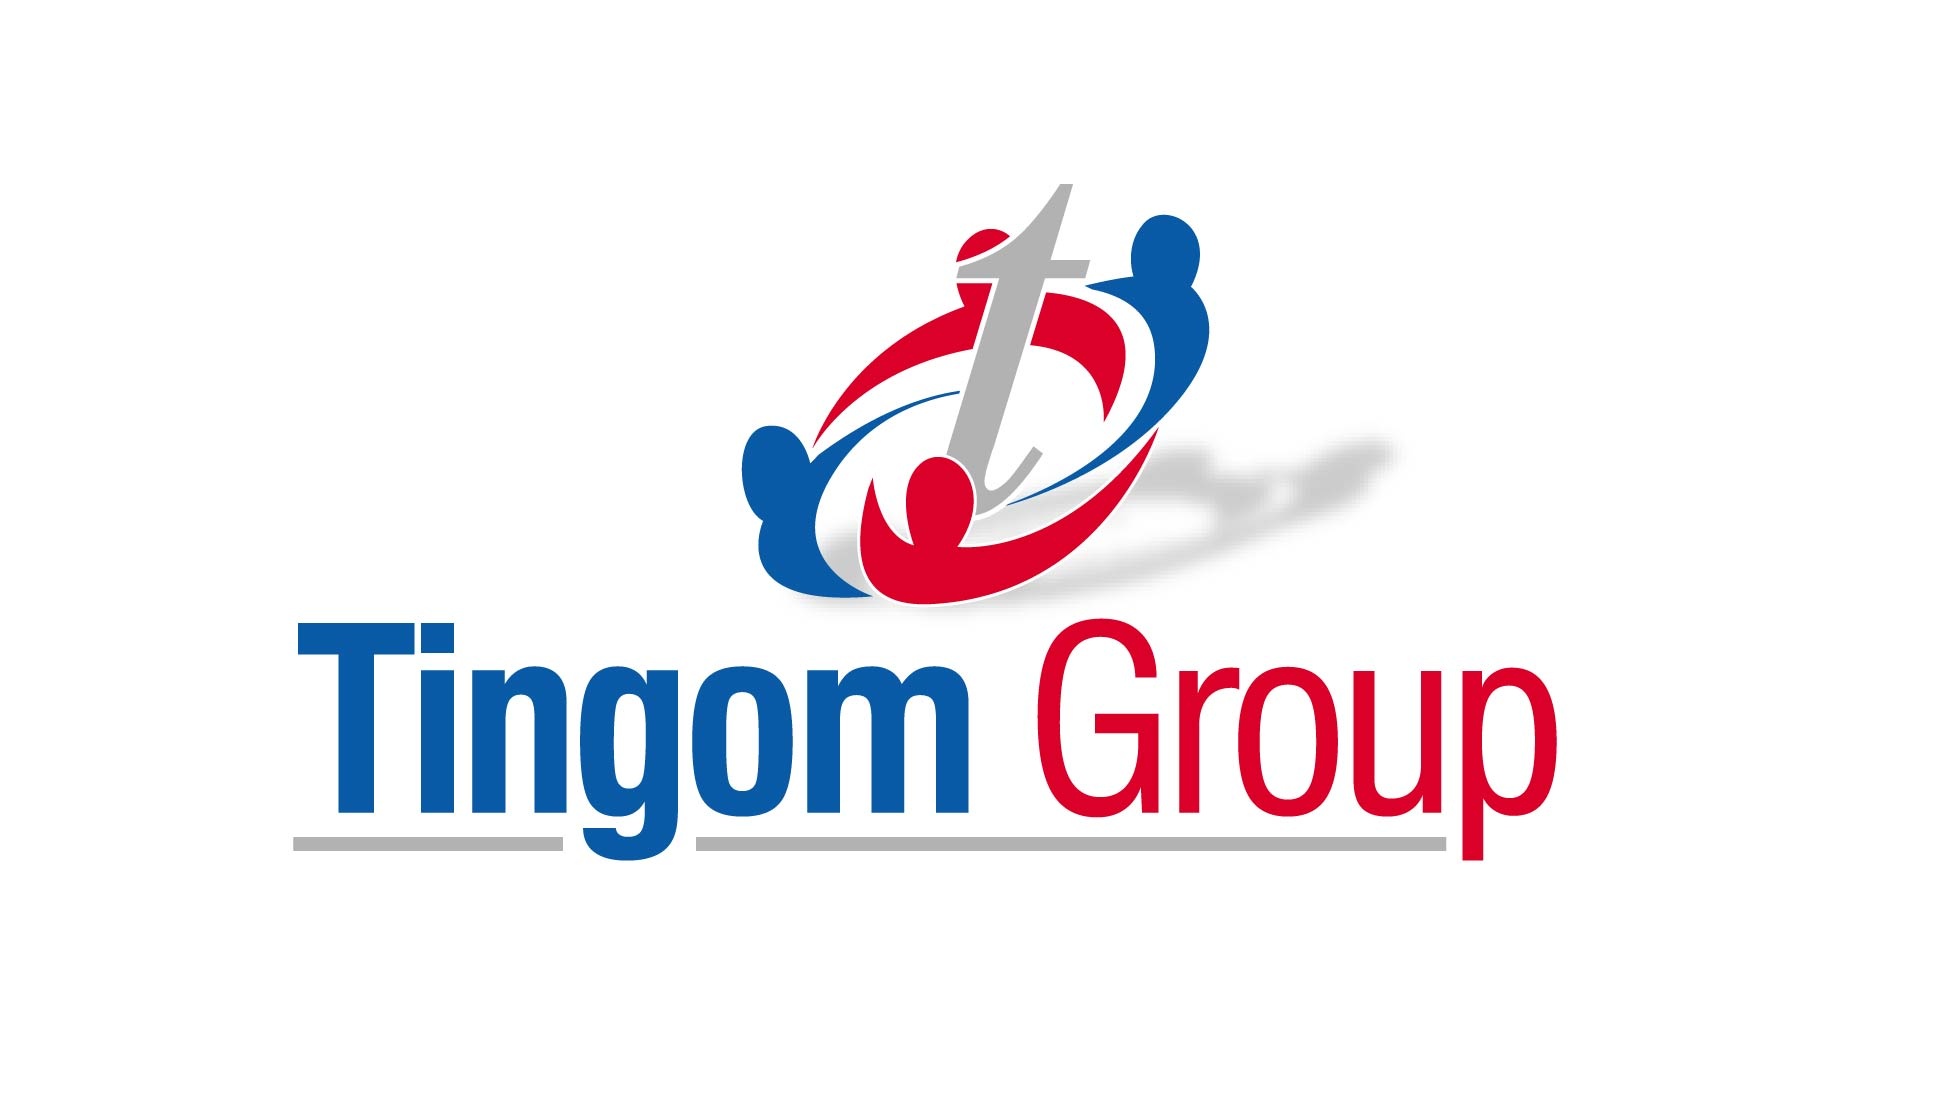 Logo of Tingom Group, a dynamic and innovative company in vibrant shades of blue and red. The logo features a stylized letter 'T' with curved lines, representing growth and forward movement. The design exudes a sense of professionalism and modernity, reflecting the company's commitment to excellence in industry.